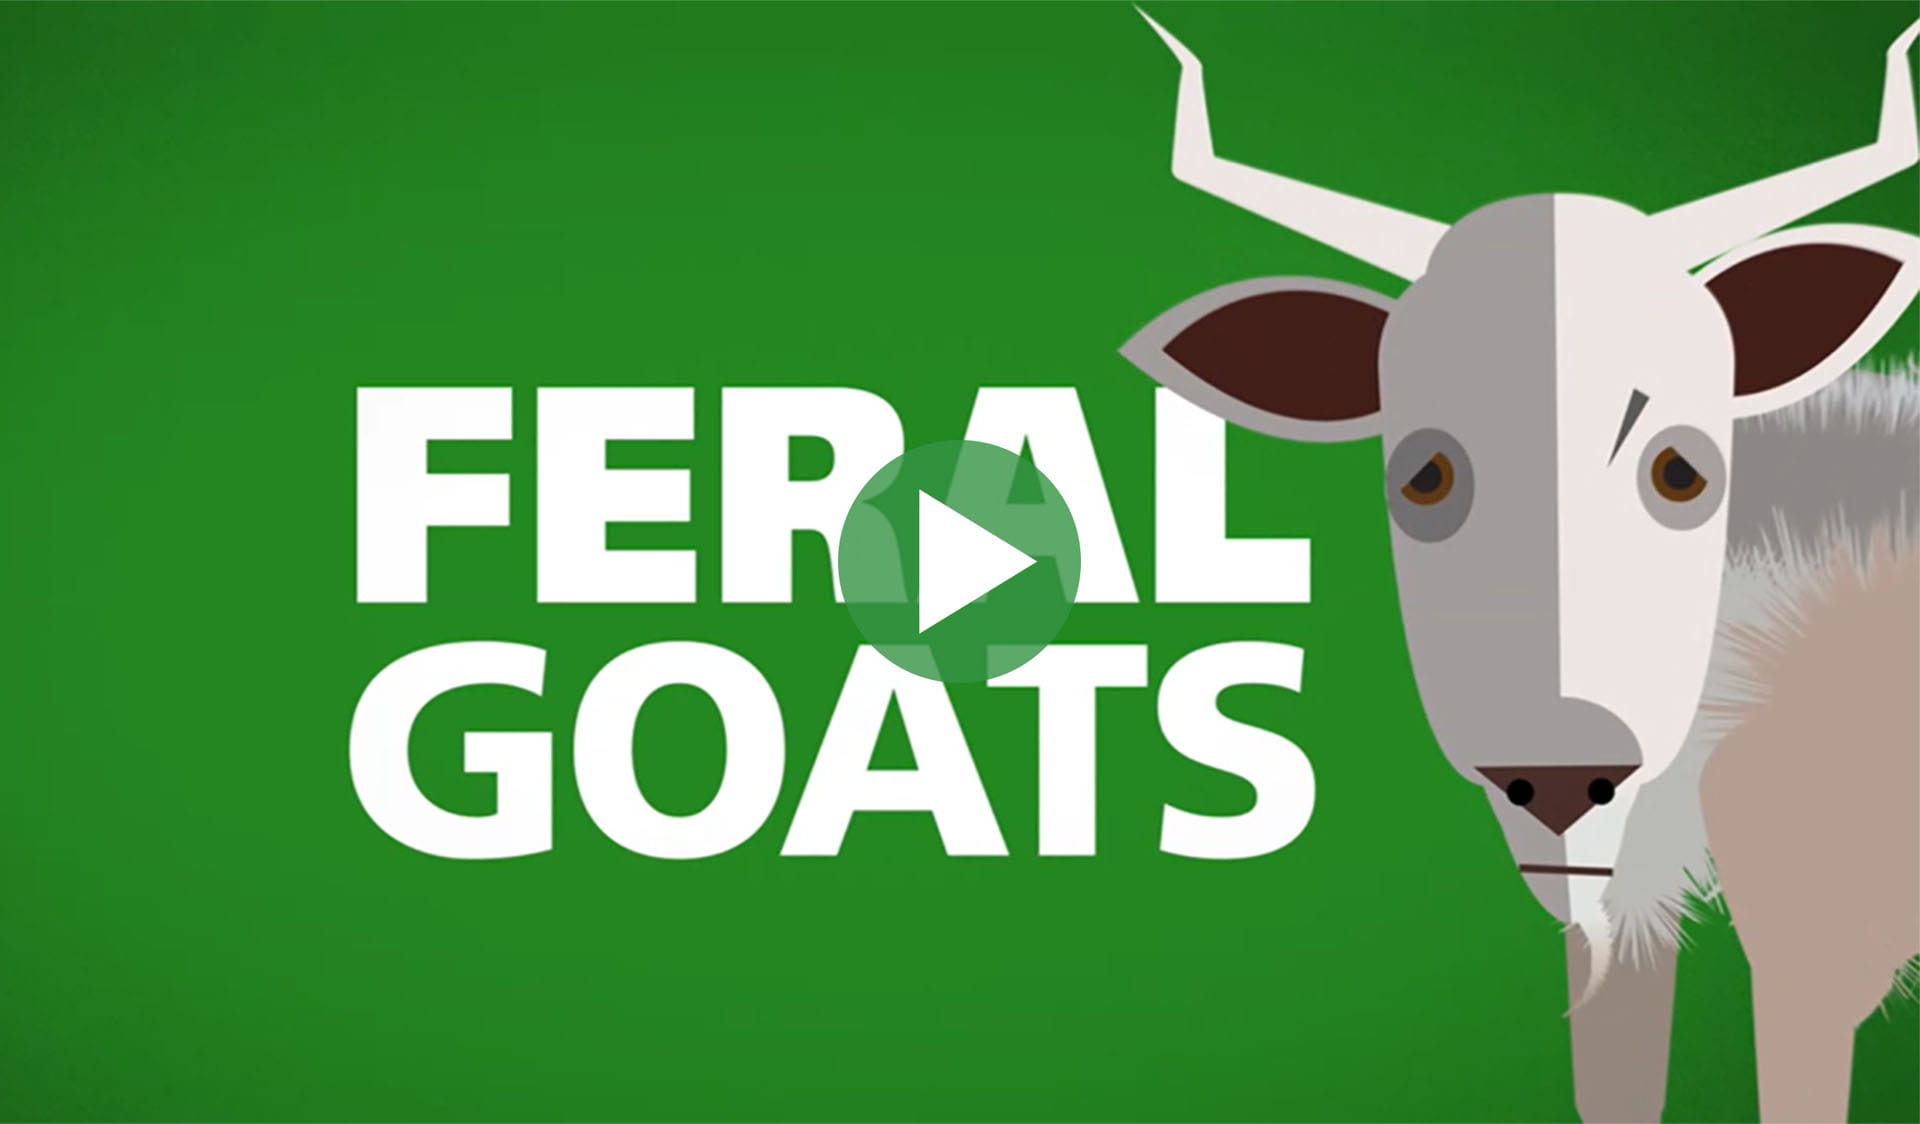 Image still from Feral goats in Victoria video, with play icon overlay.